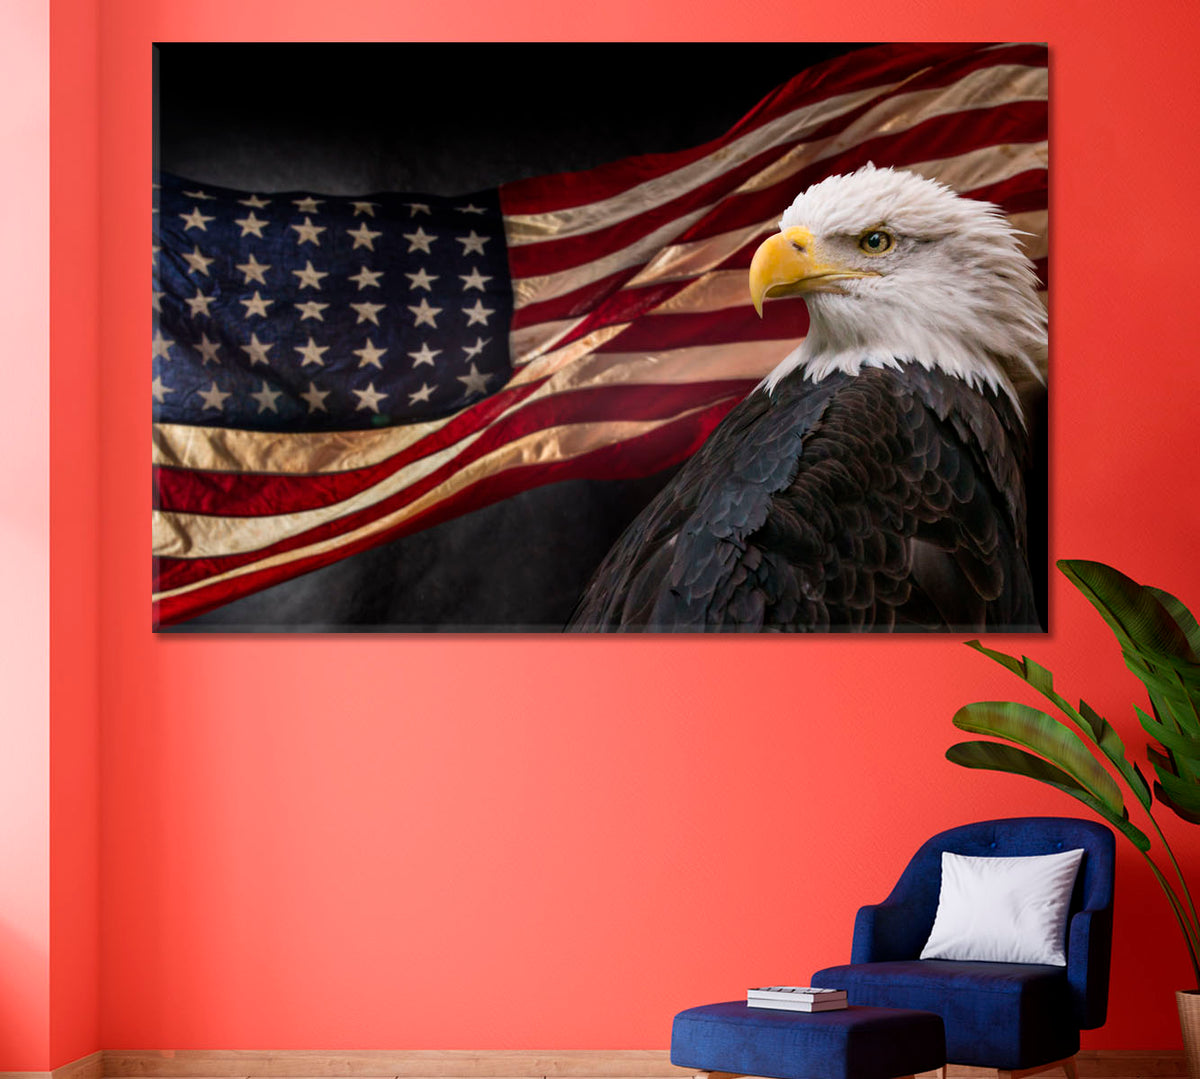 Powerful America Patriotic Symbols Bald Eagle Poster Posters, Flags Giclee Print Artesty 1 panel 24" x 16" 